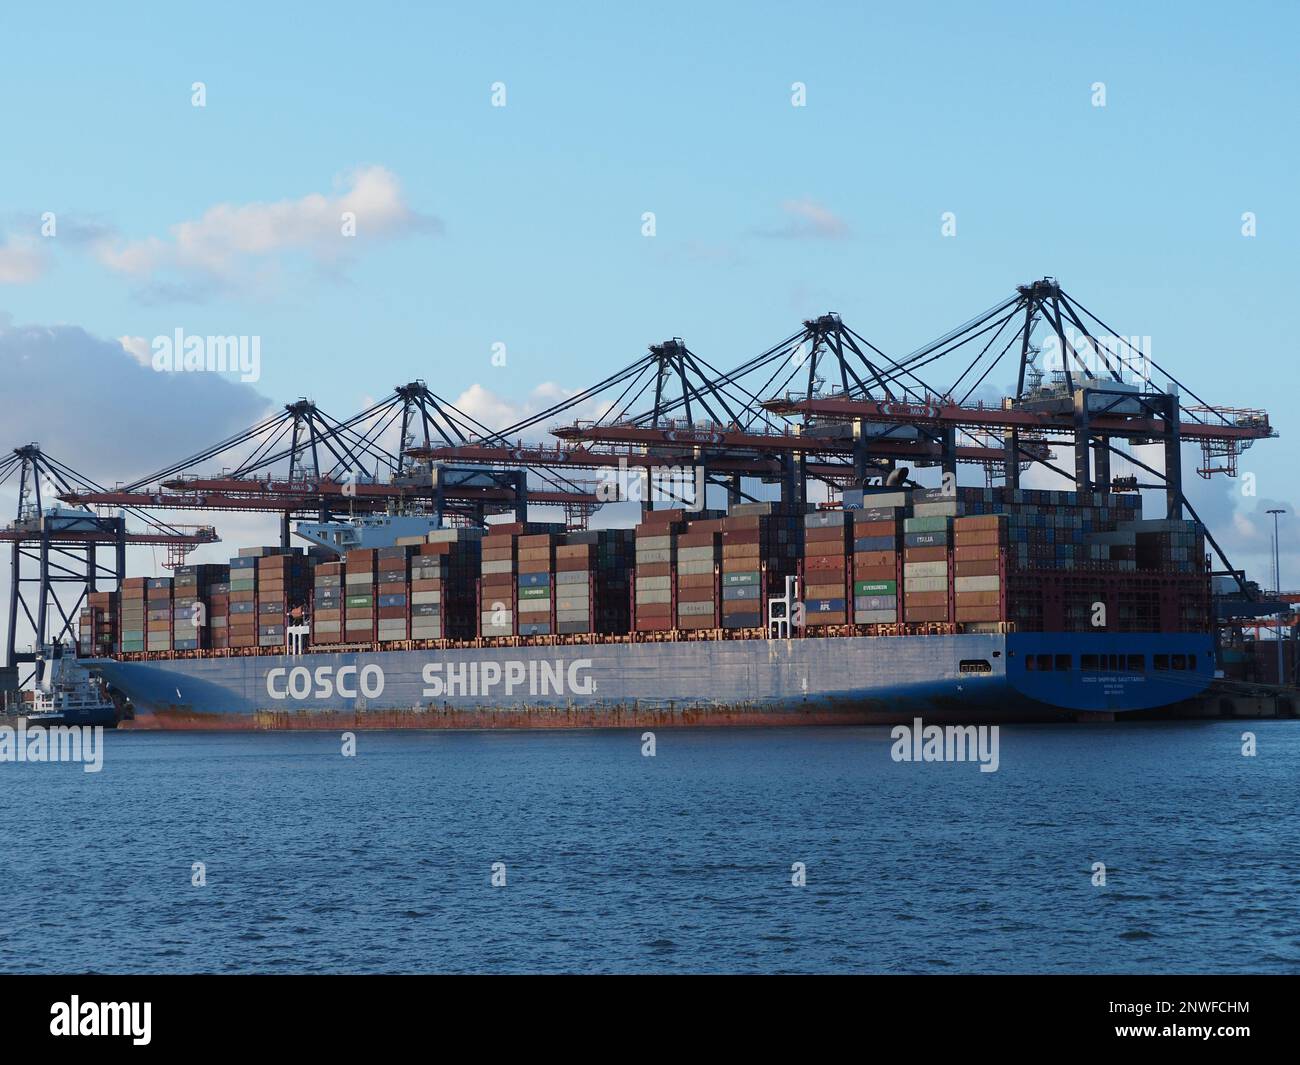 The Cosco shipping 'Sagittarius' can transport around 20.000 containers. Port of Rotterdam, the Netherlands. Stock Photo